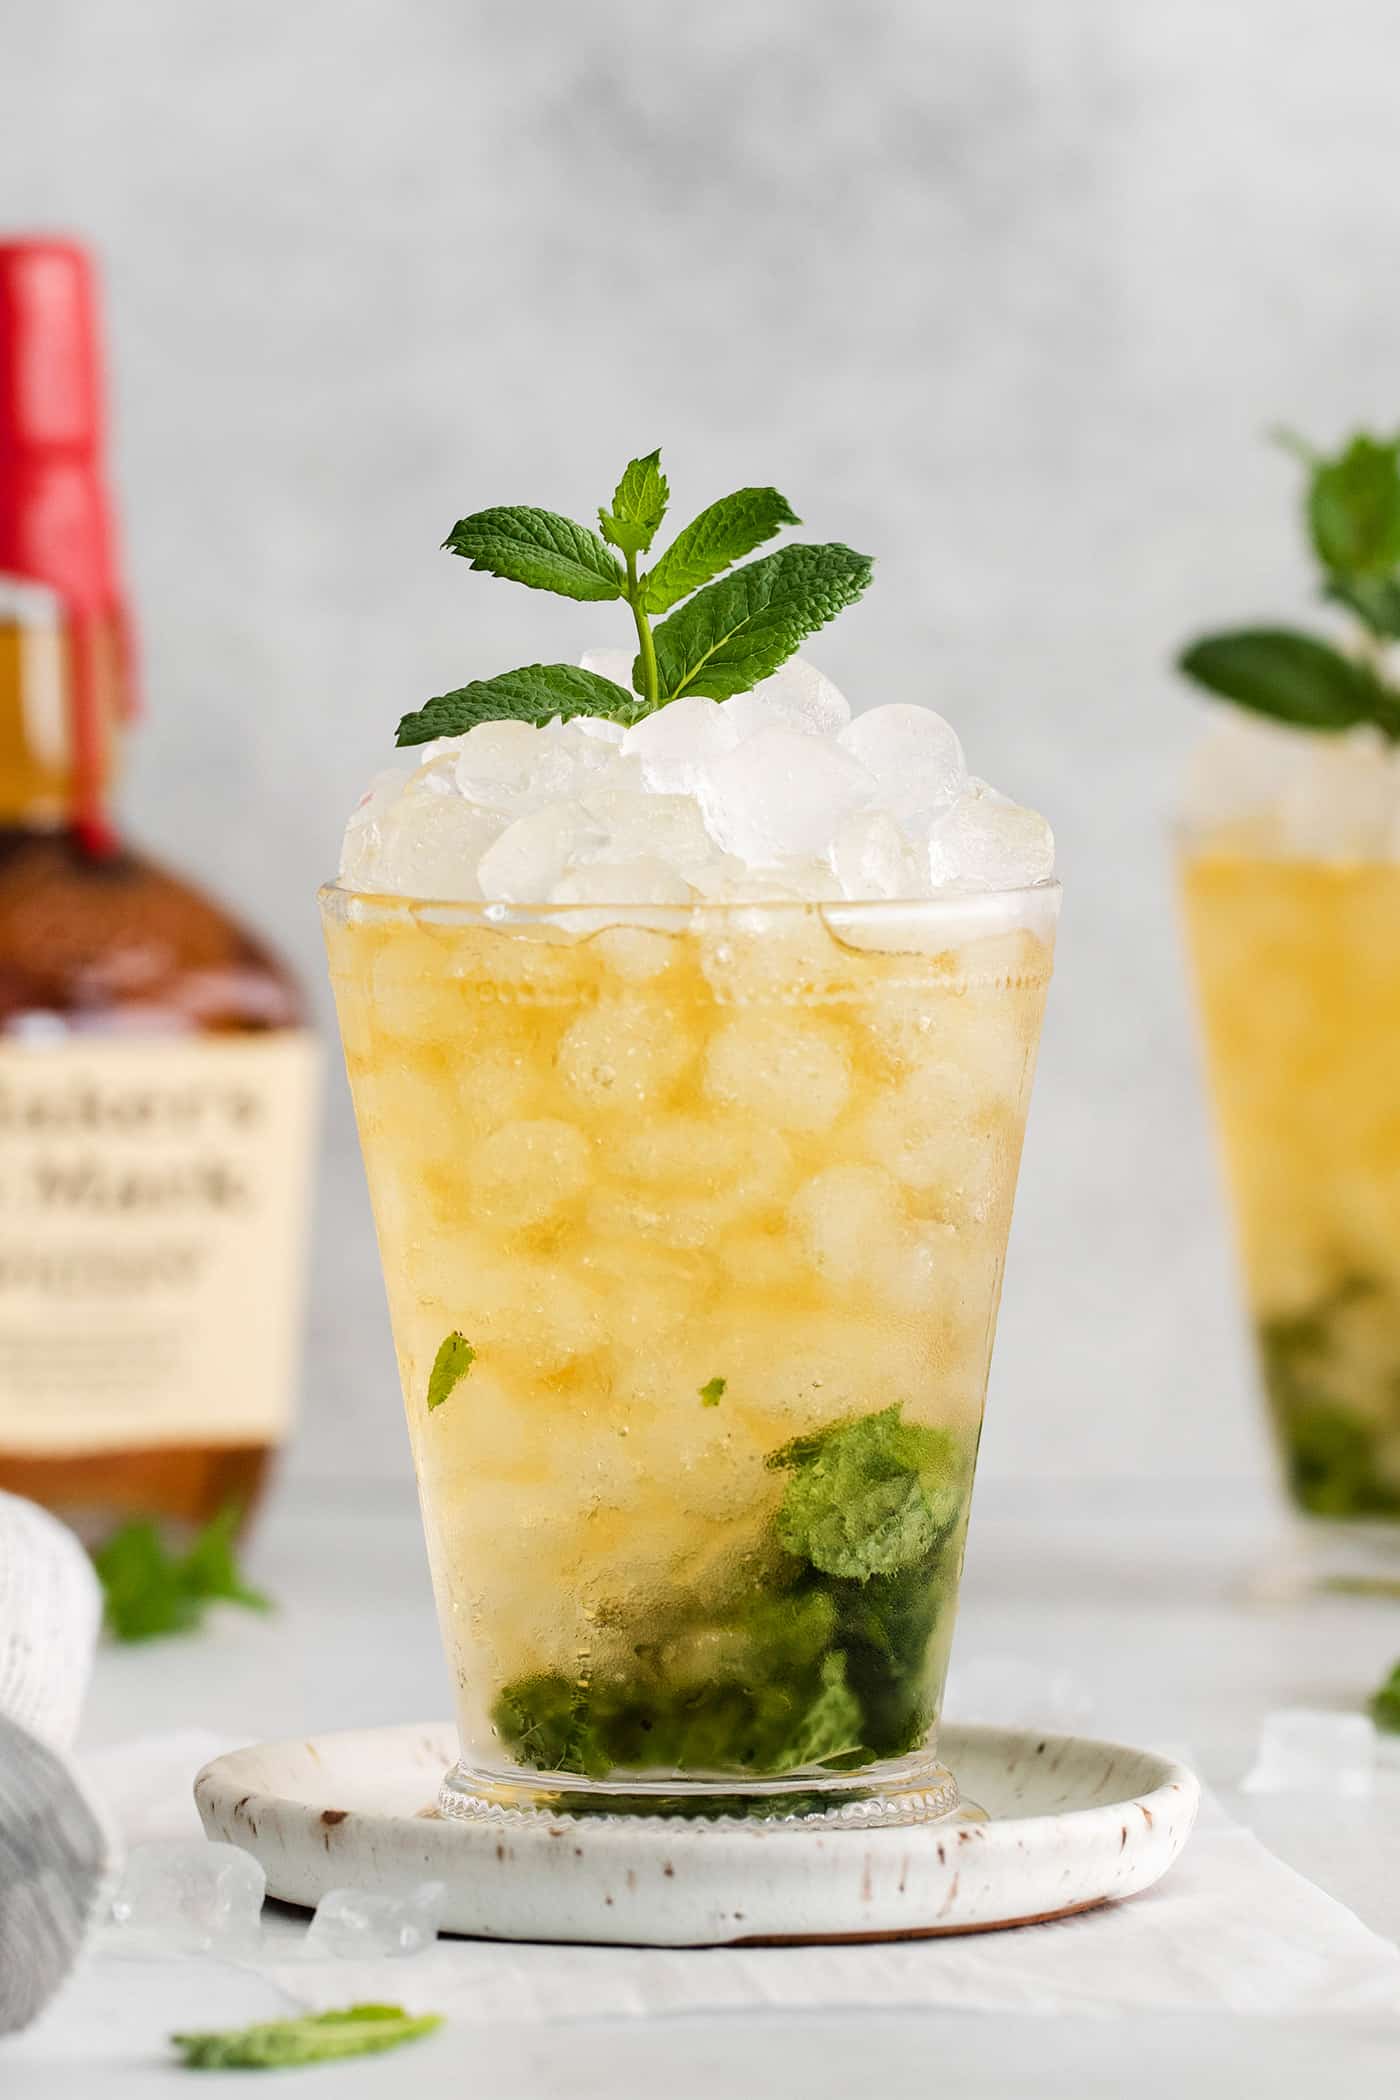 A cocktail made with bourbon, mint, and simple syrup